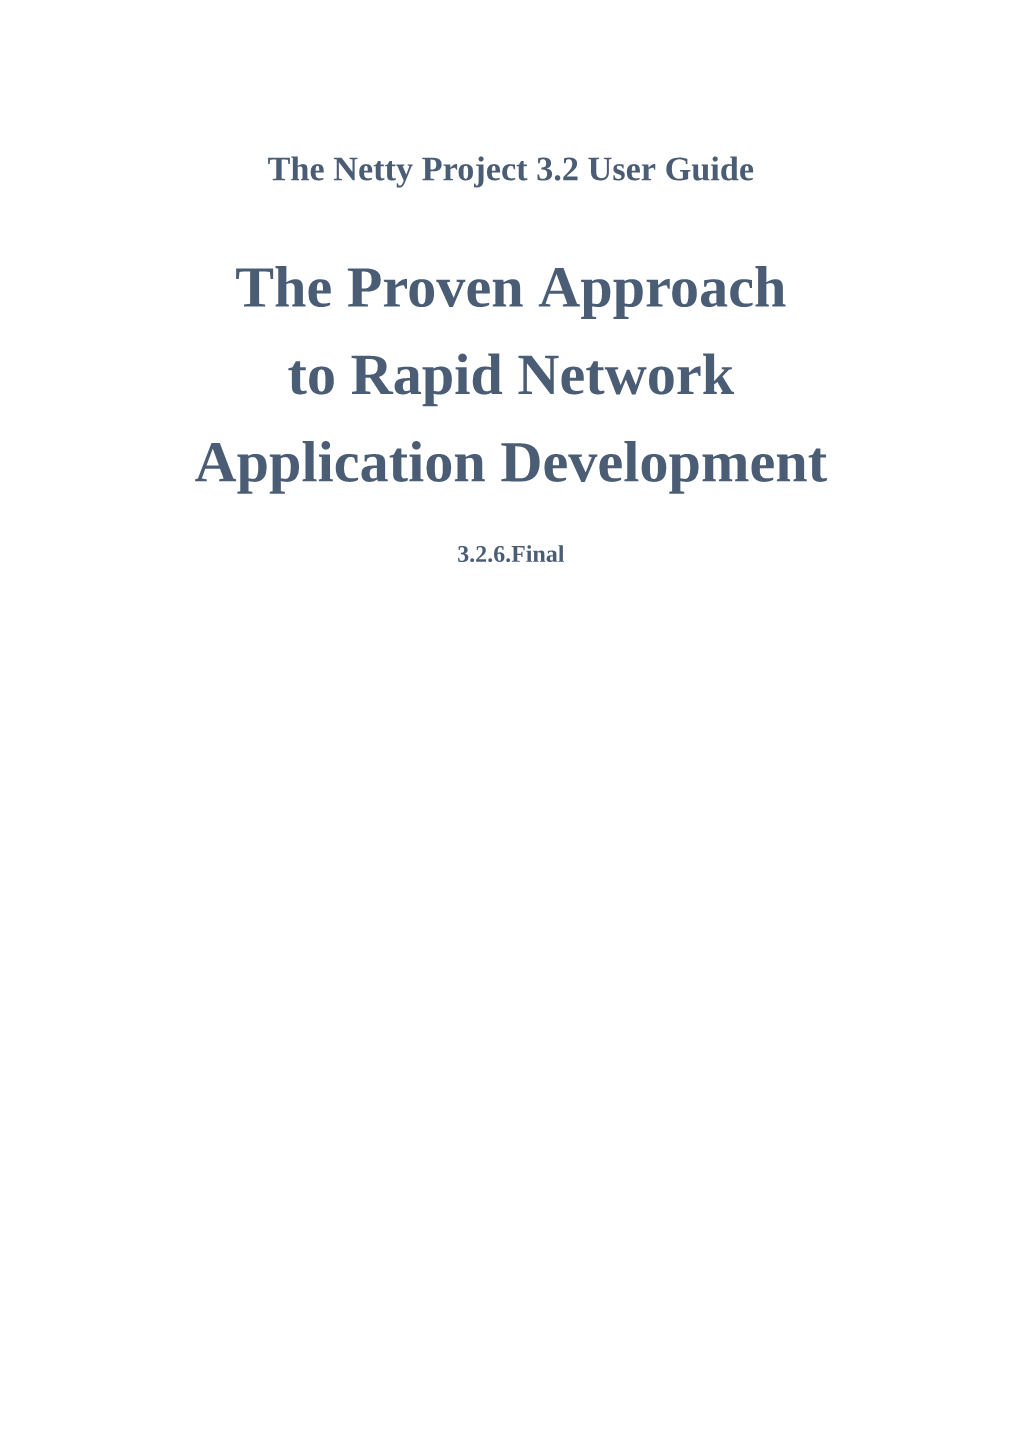 The Netty Project 3.2 User Guide the Proven Approach to Rapid Network